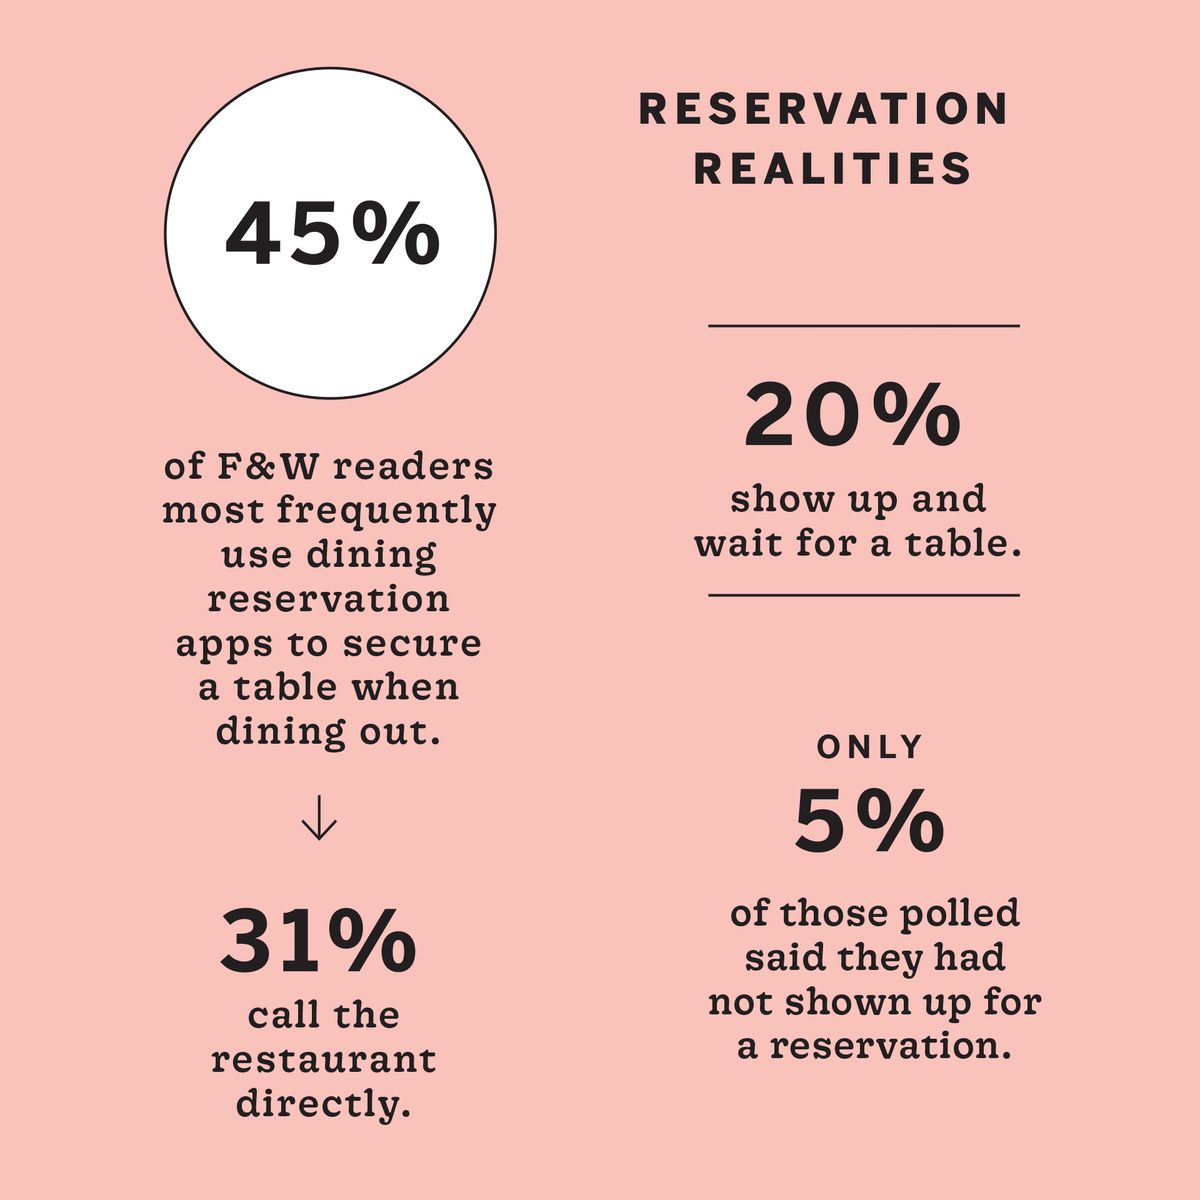 Infographic titled "Reservation Realities" showing that 45% of F&W readers most frequently use dining reservation apps to secure a table when dining out, 31% call the restaurant directly, 20% show up and wait for a table, and only 5% of those polled said they had not shown up for a reservation